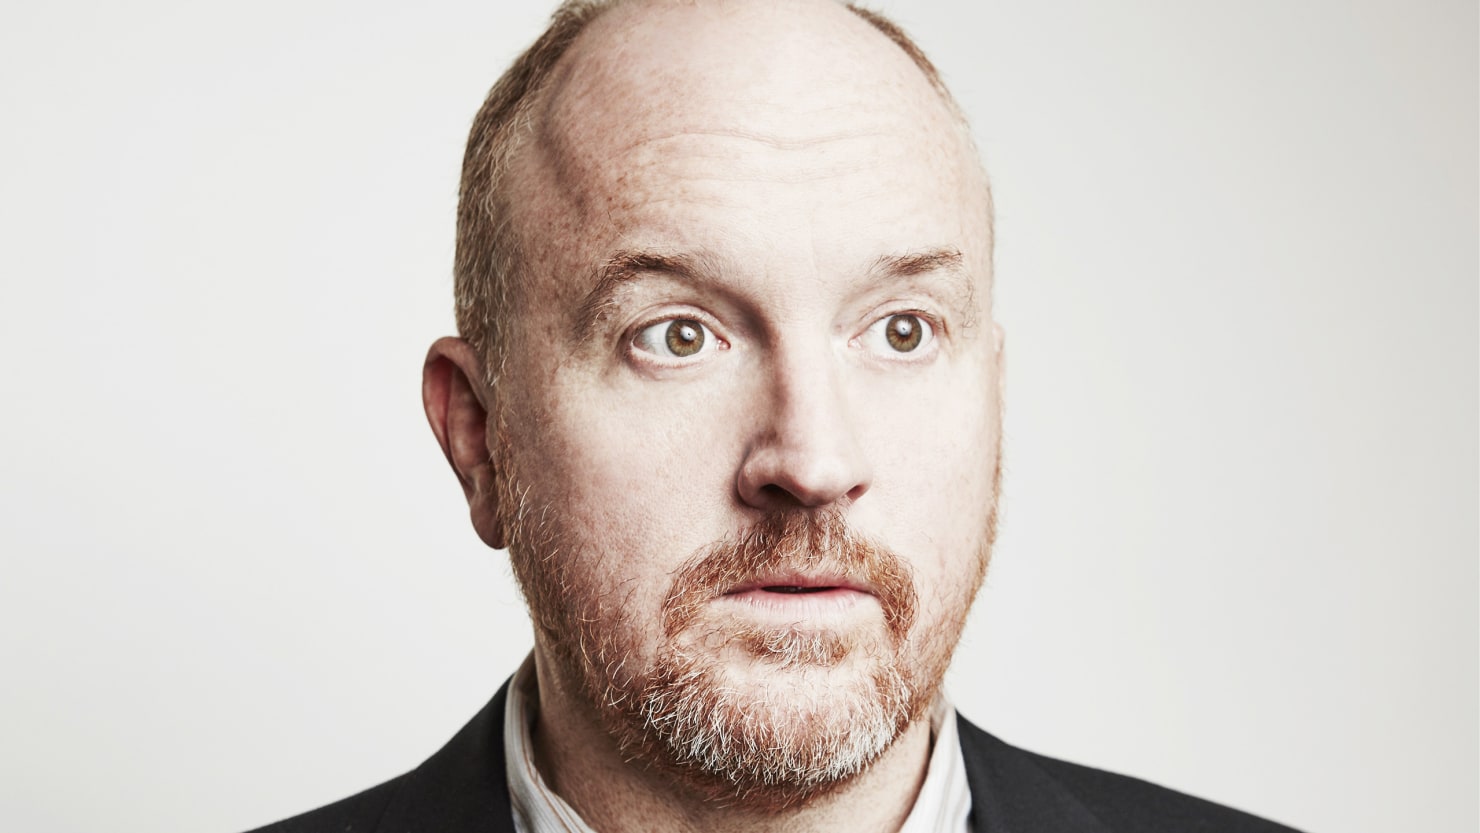 Ma! Watch 'Sincerely Louis CK' on my website, louisck.com. Link is